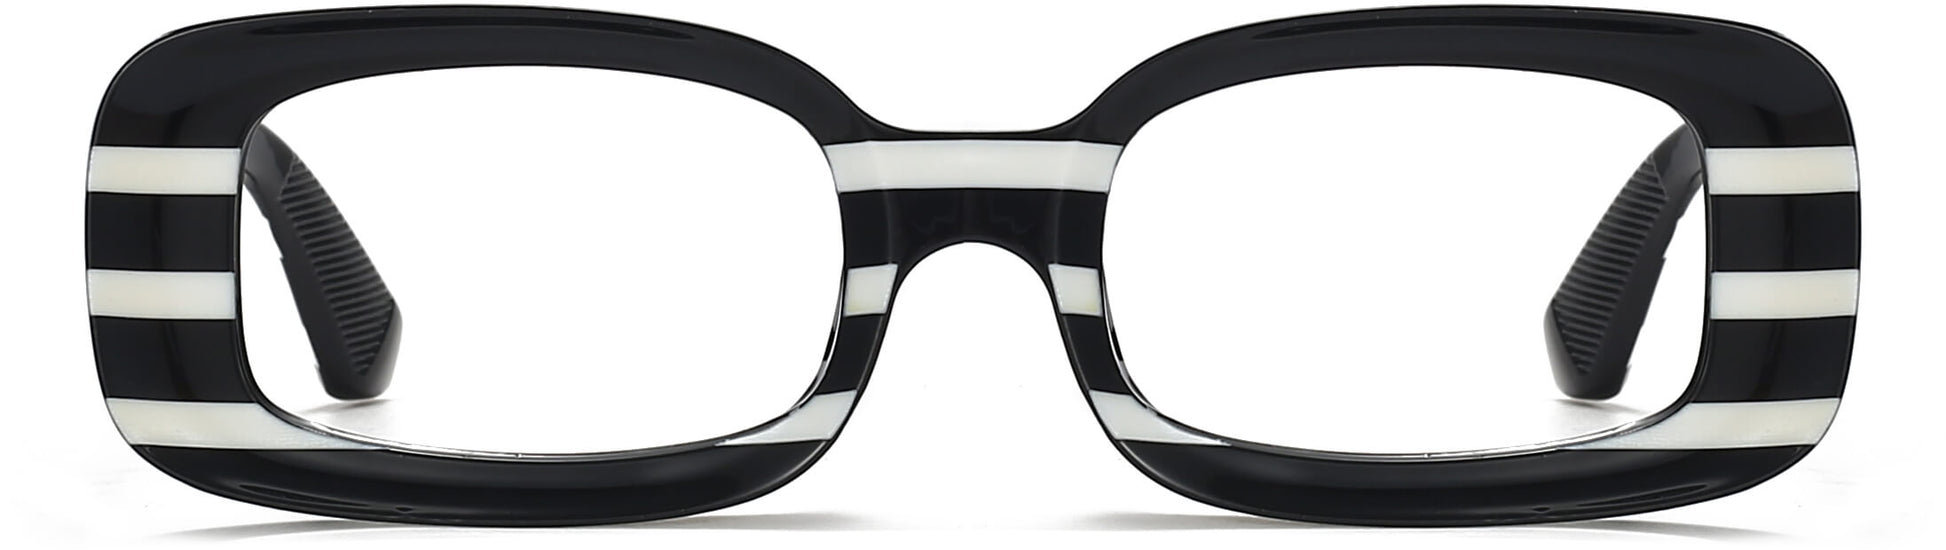 Sevyn Rectangle Black Eyeglasses from ANRRI, front view